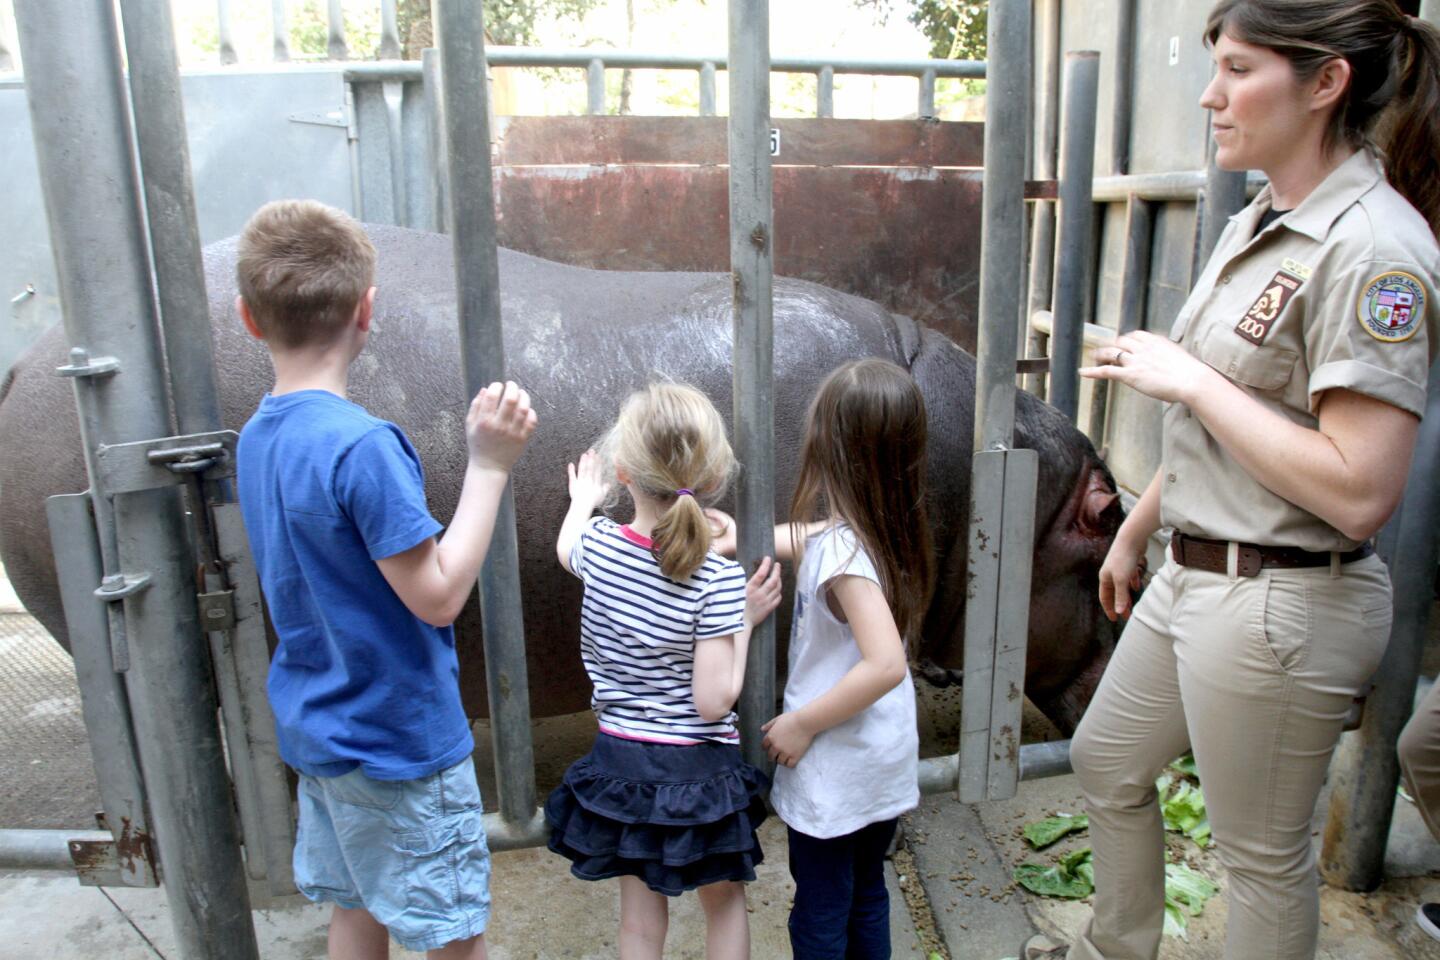 Photo Gallery: L.A. Zoo's new behind the scenes hippo encounter